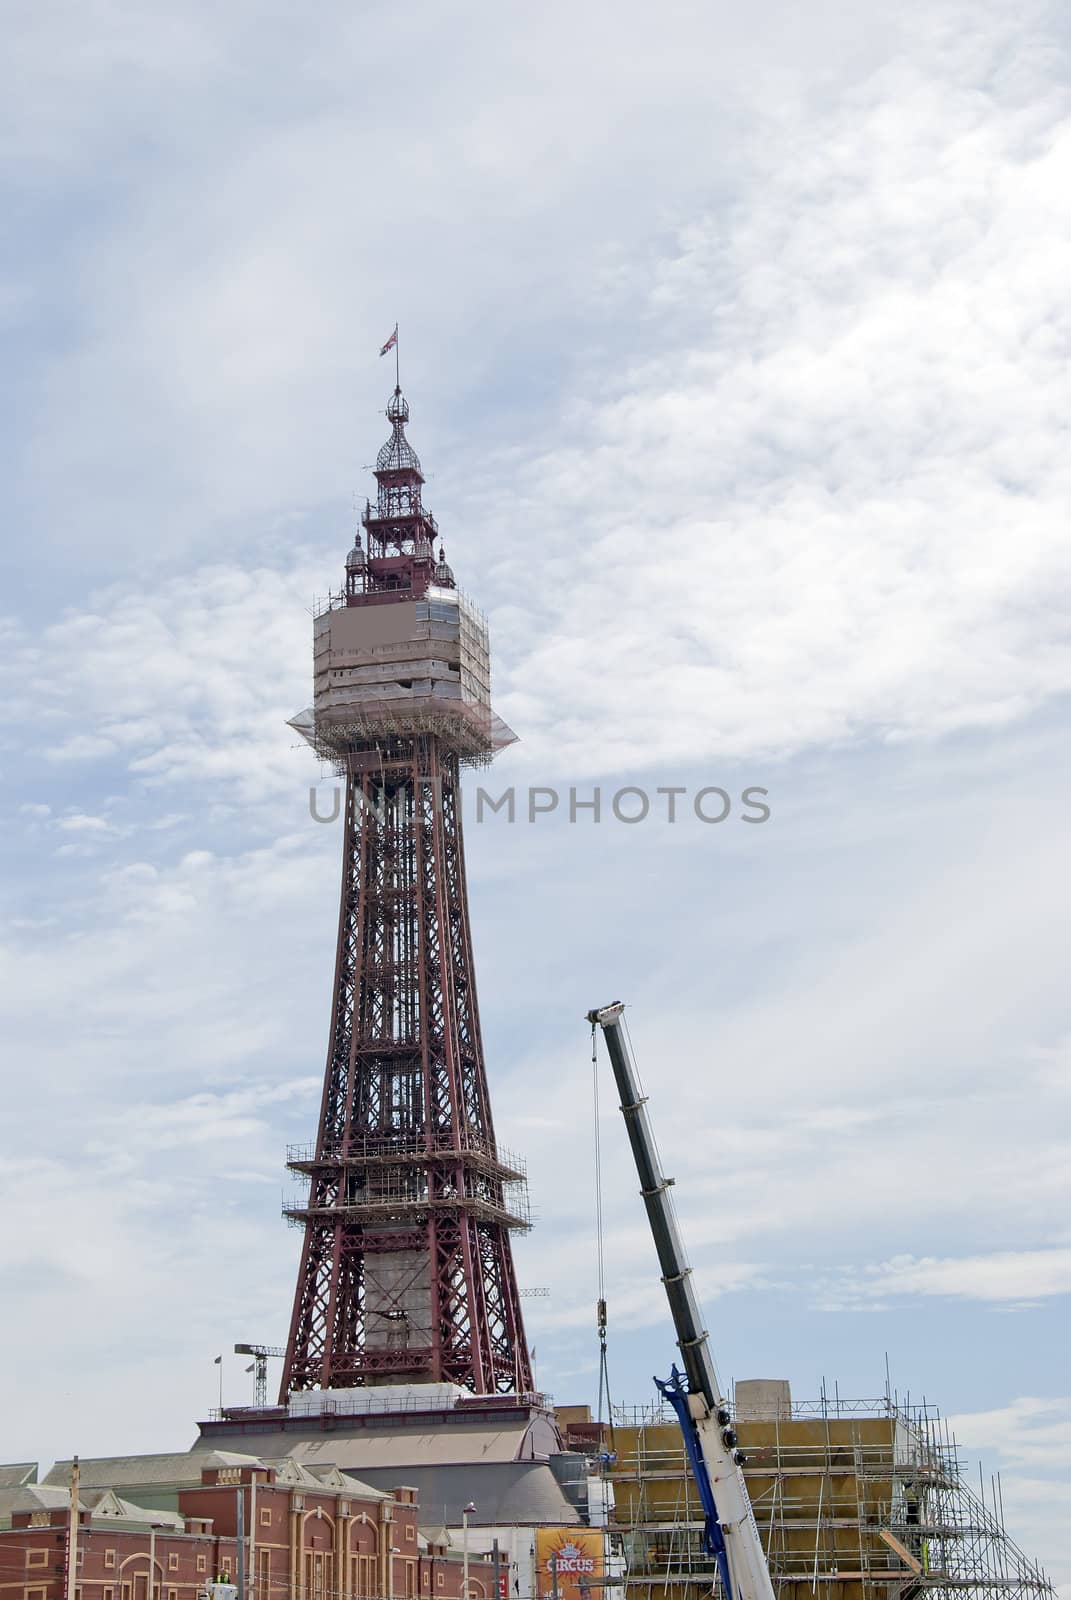 Blackpool Tower and Crane by d40xboy